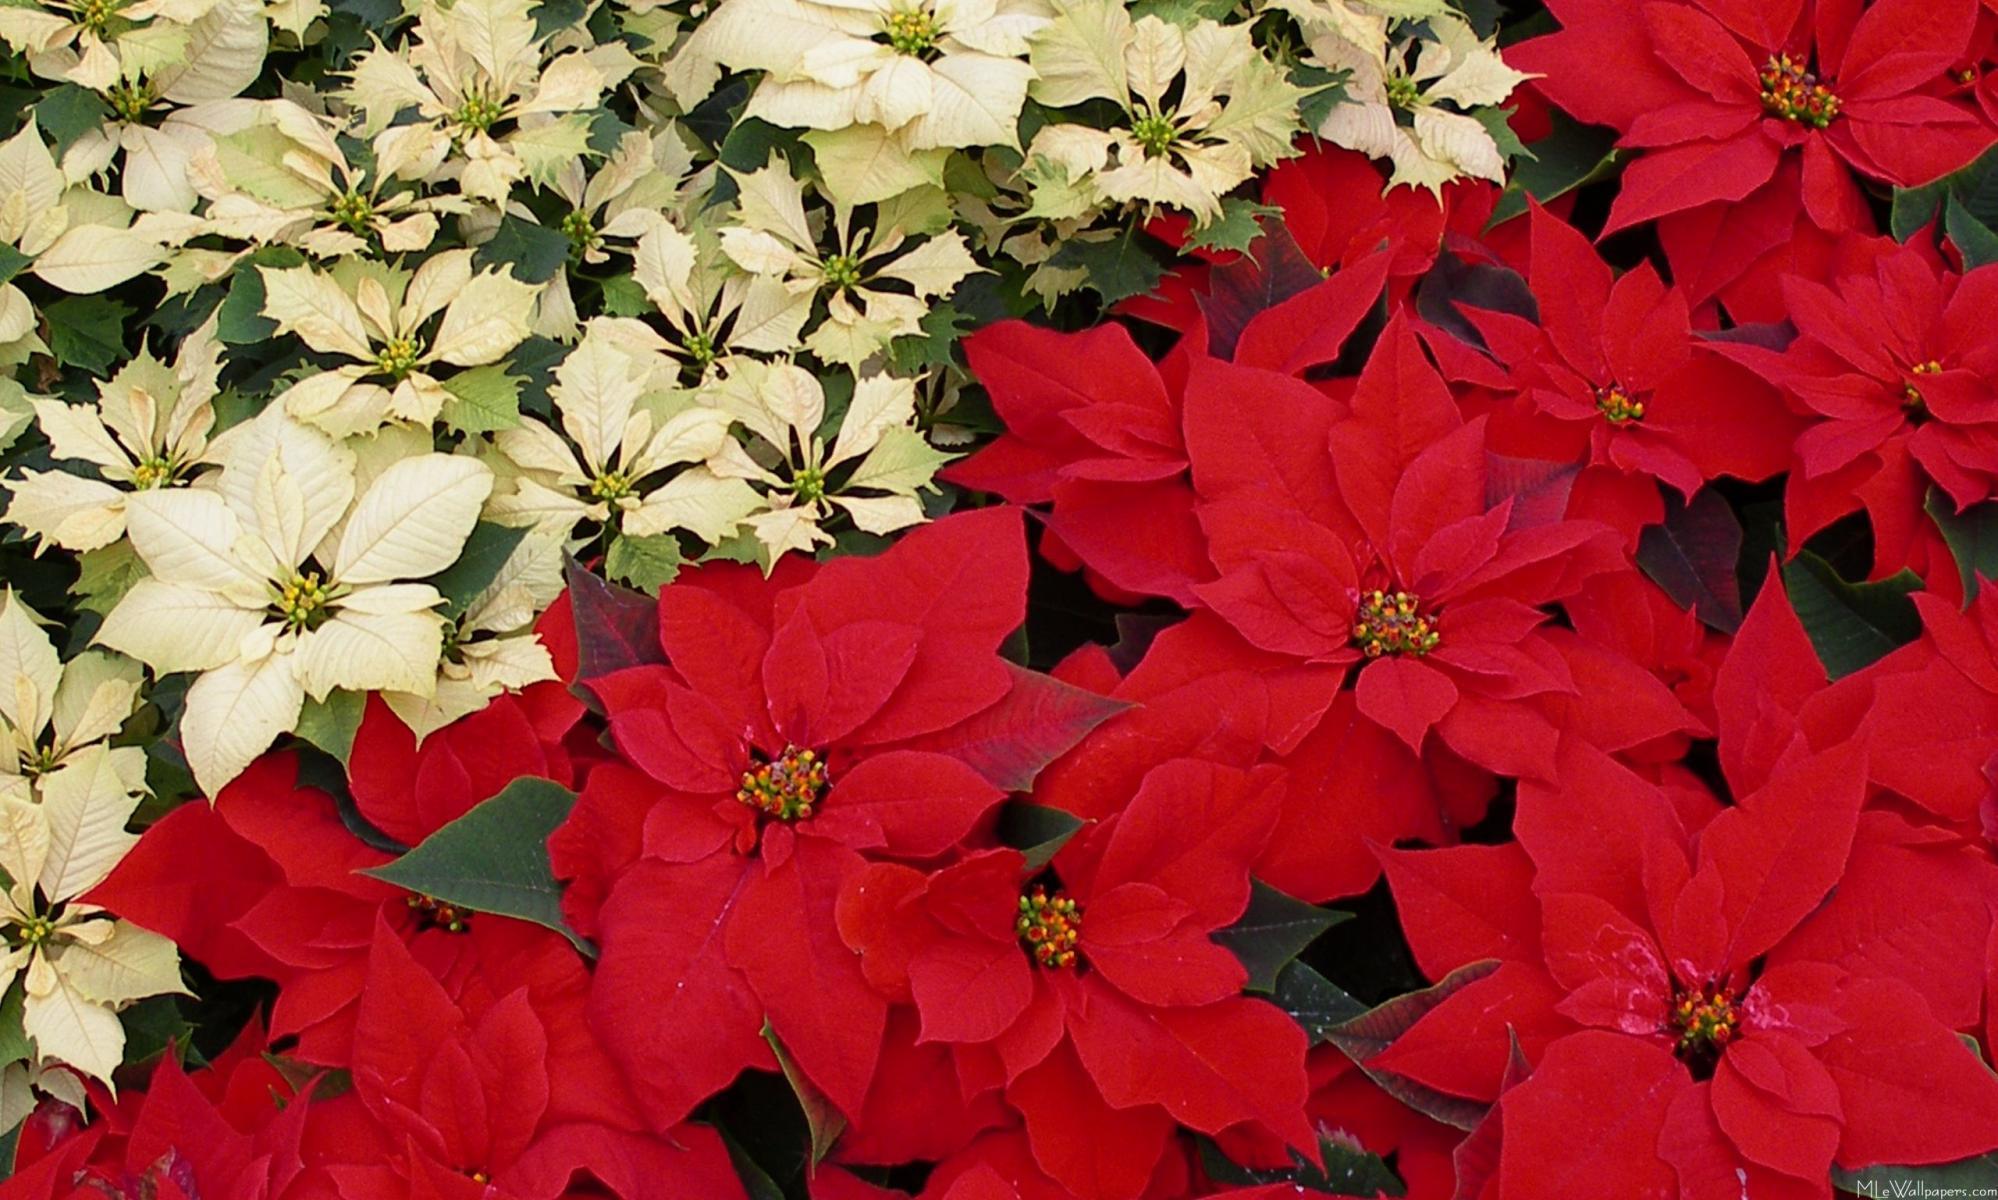 MLe and Red Poinsettias